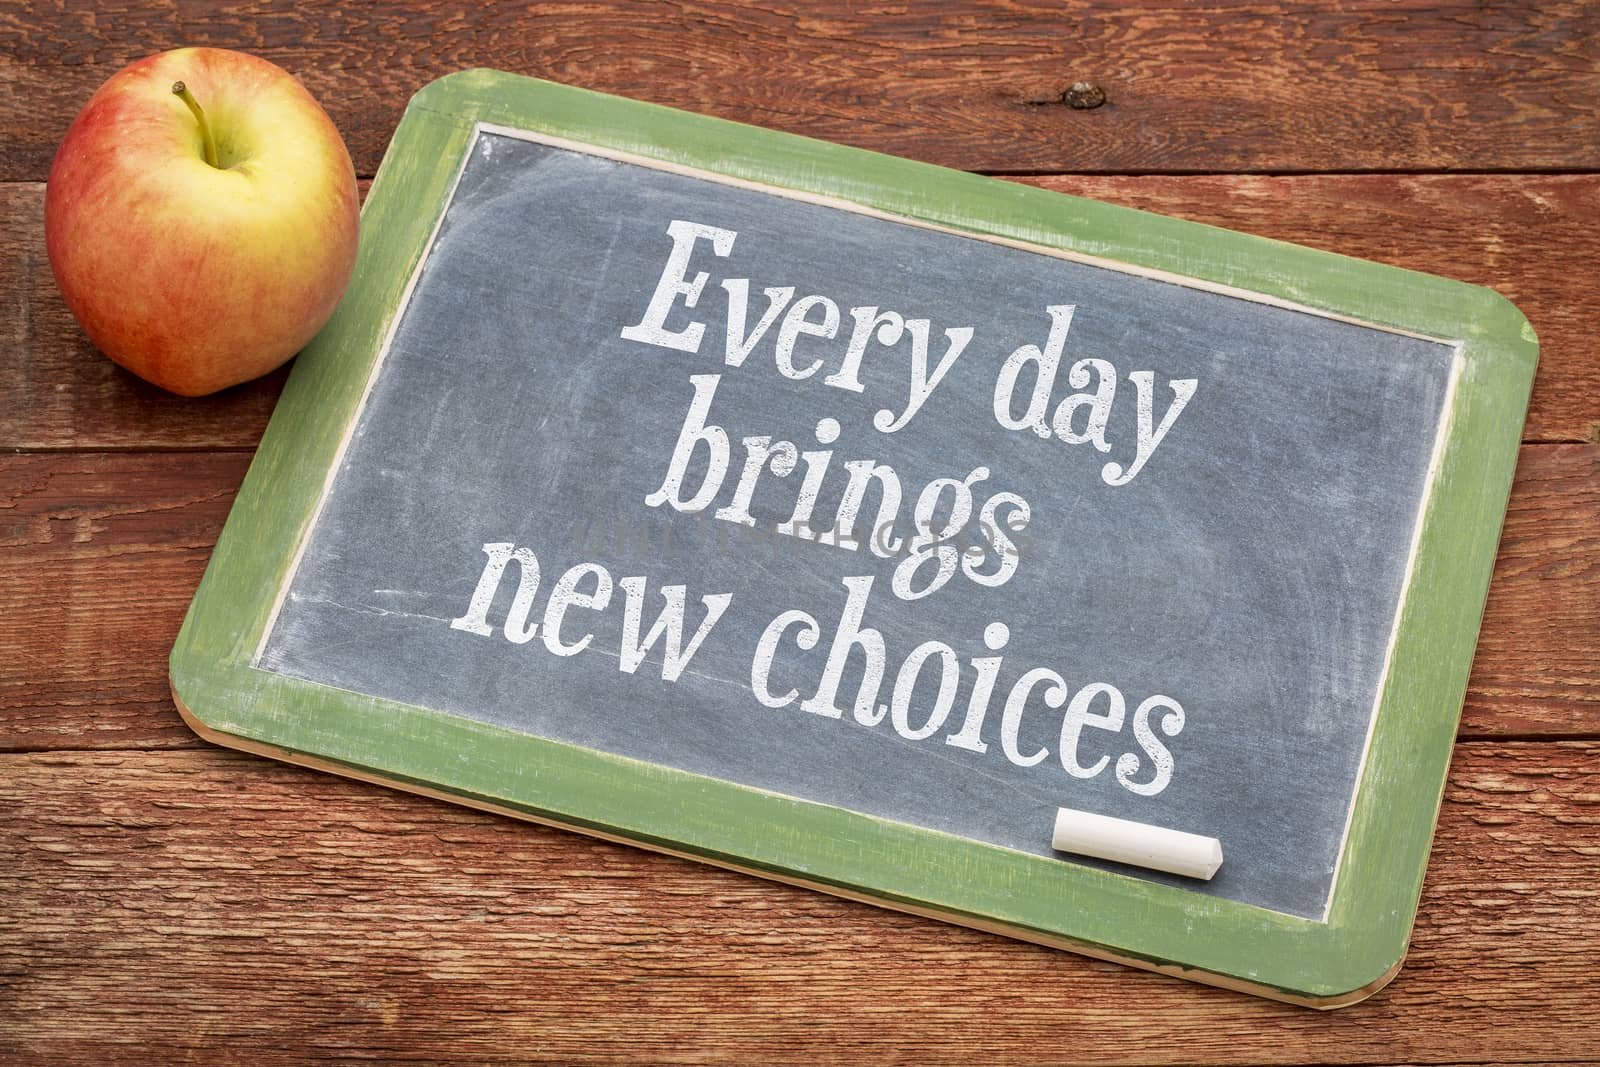 Every day brings new choices - motivational positive words on a slate blackboard against red barn wood